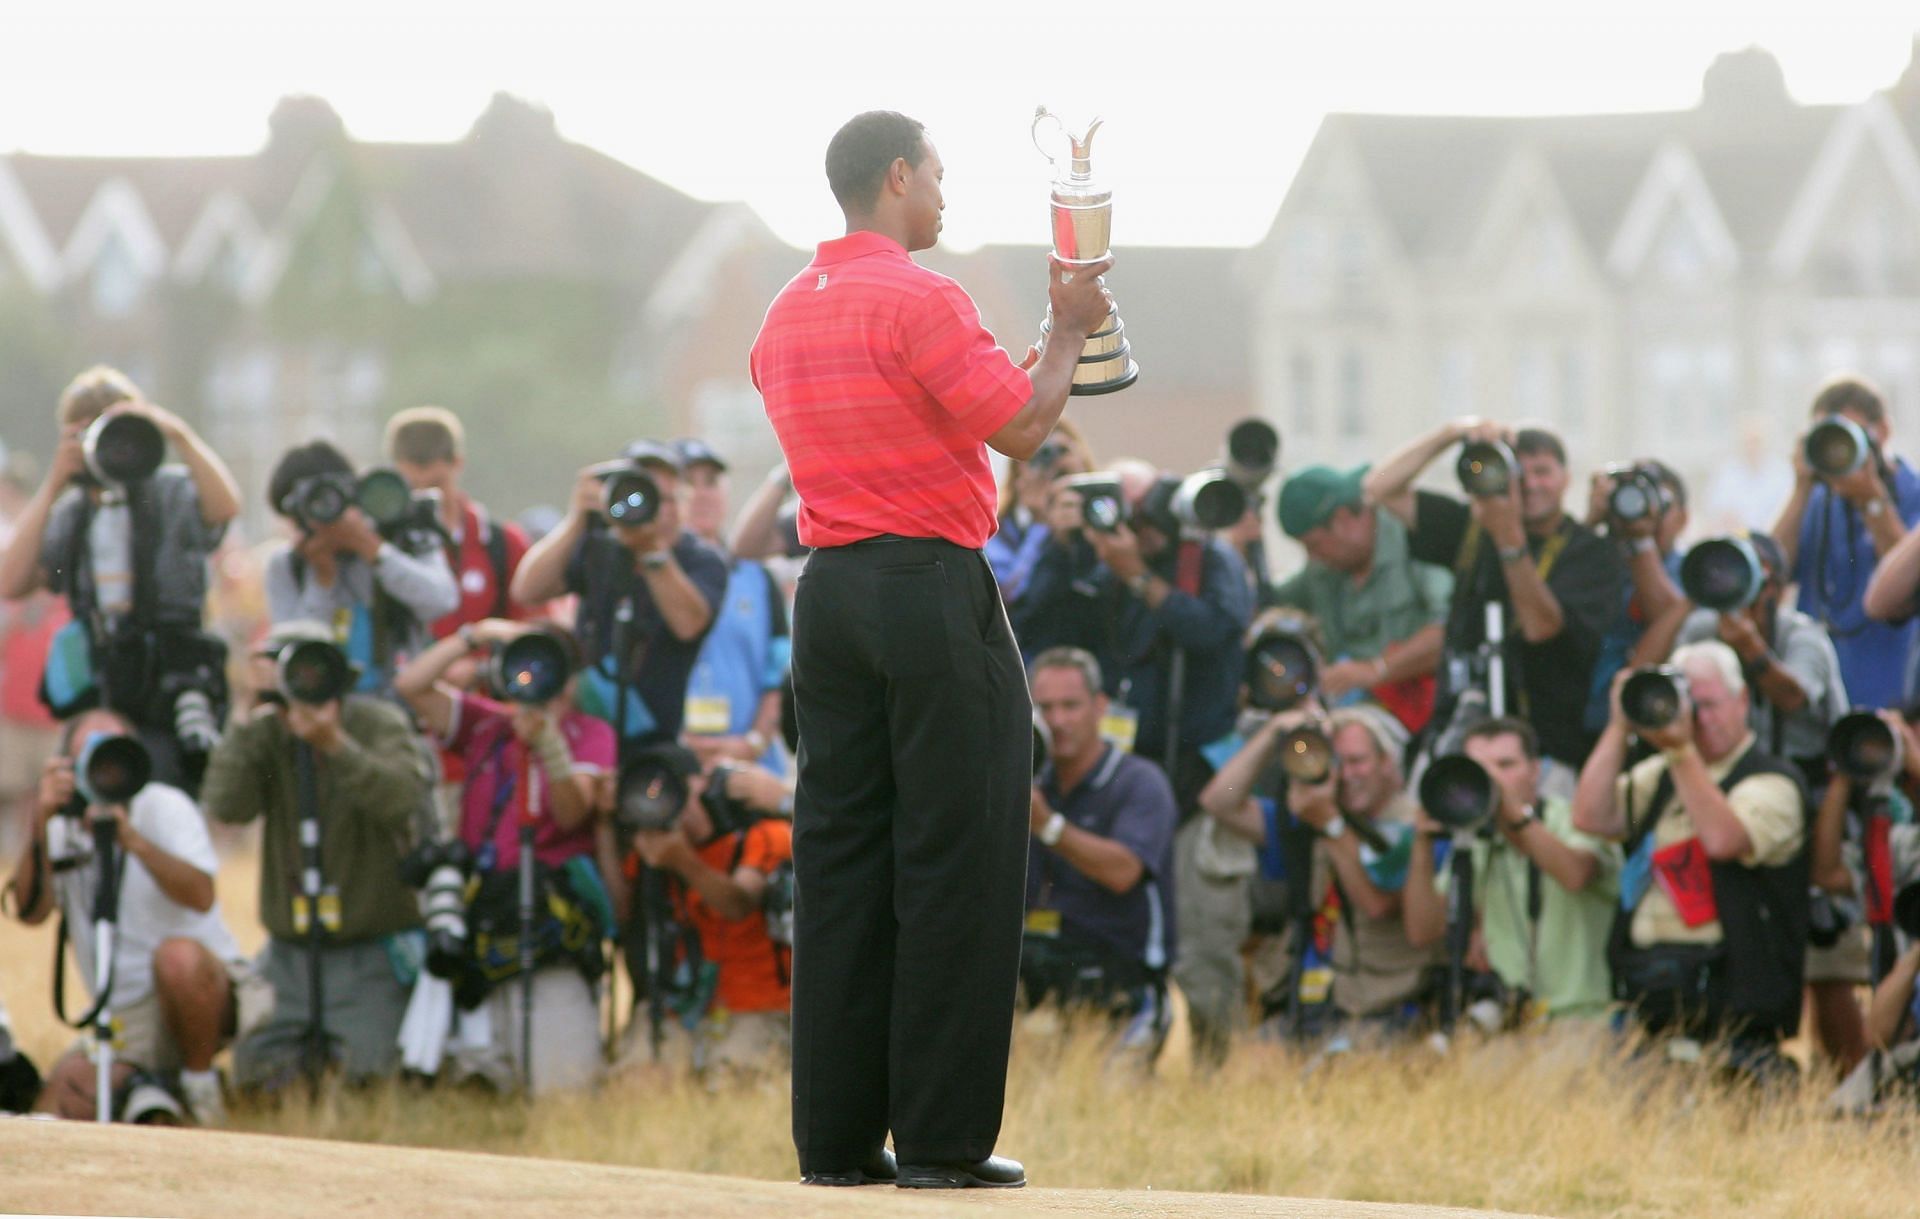 135th Open Championship - Final Round